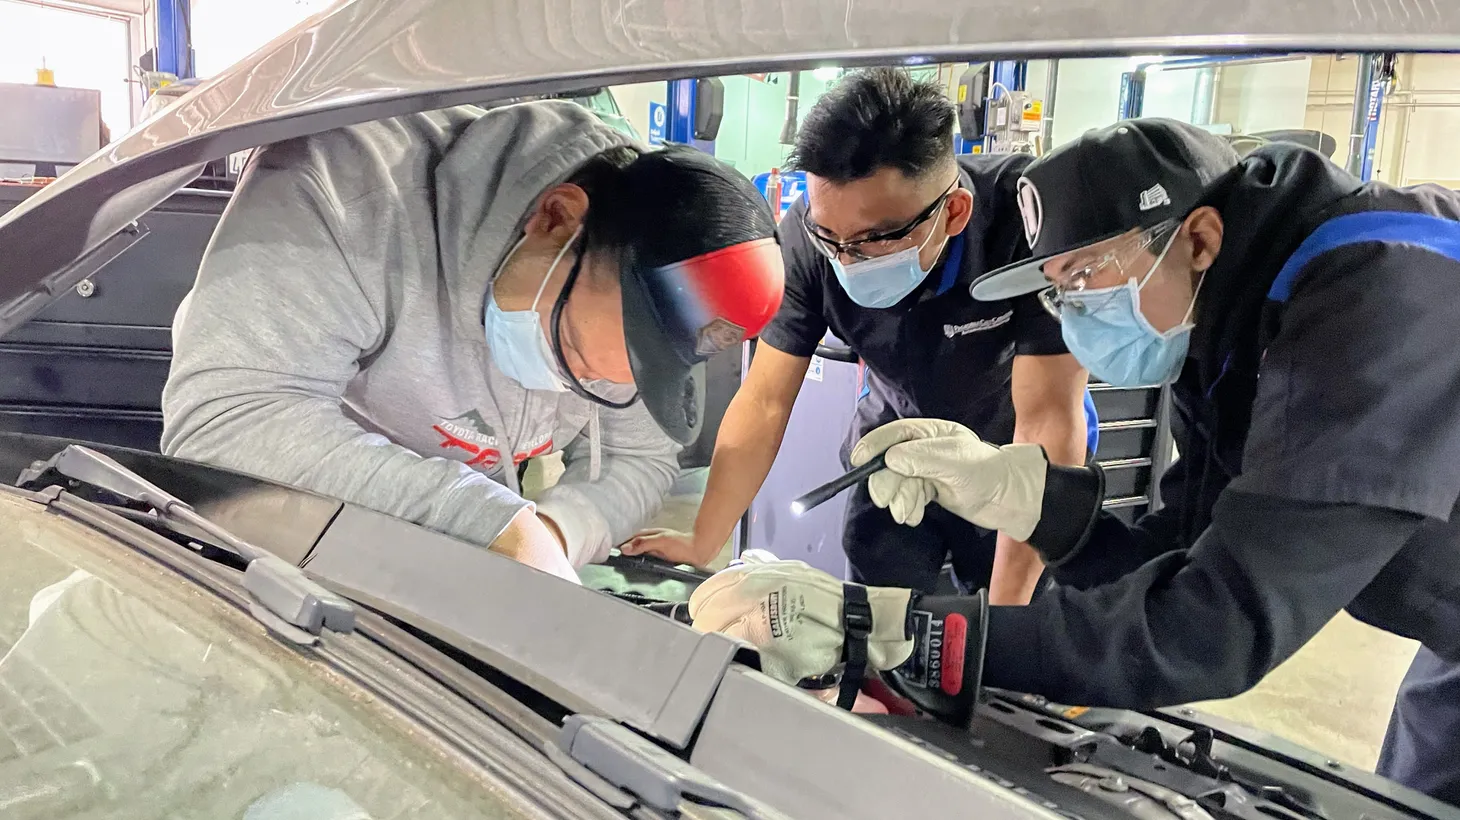 (L to R) Pasadena City College automotive technician students Tahar Ellouz, Javier Compos and Joshua Wharton, work to access the battery of an all-electric Chevy Bolt during the lab of an introductory course on electric car repair.